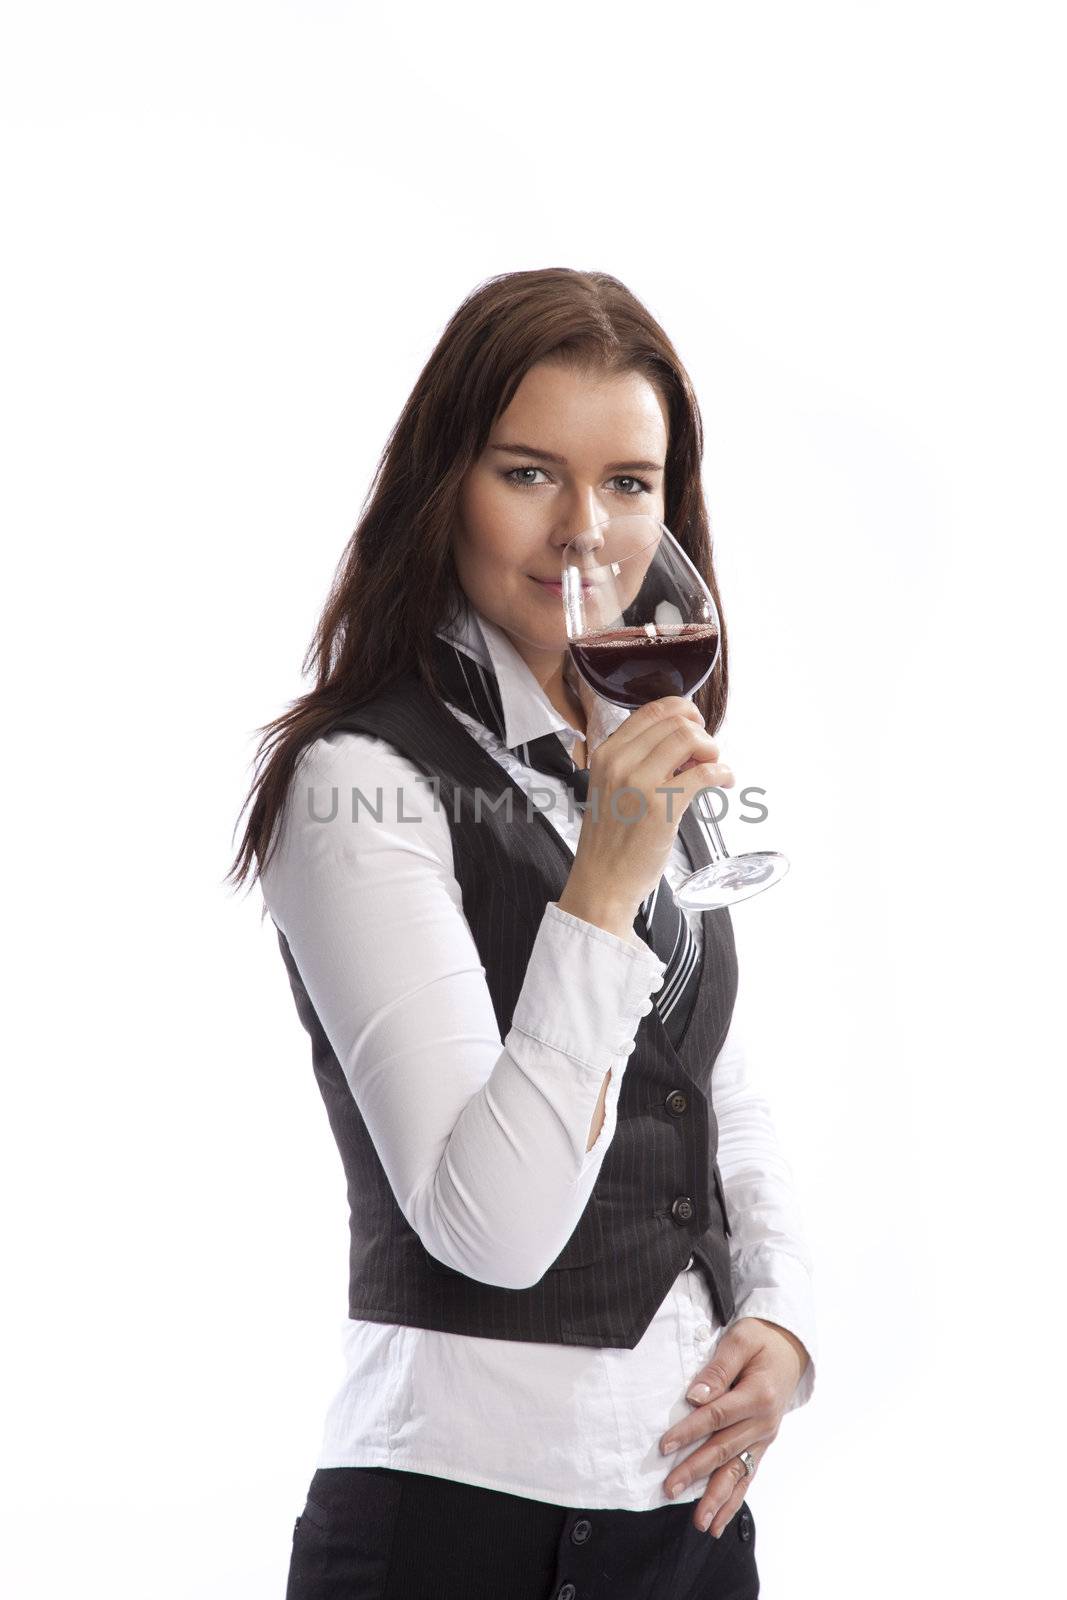 young business woman with red wine by mjp